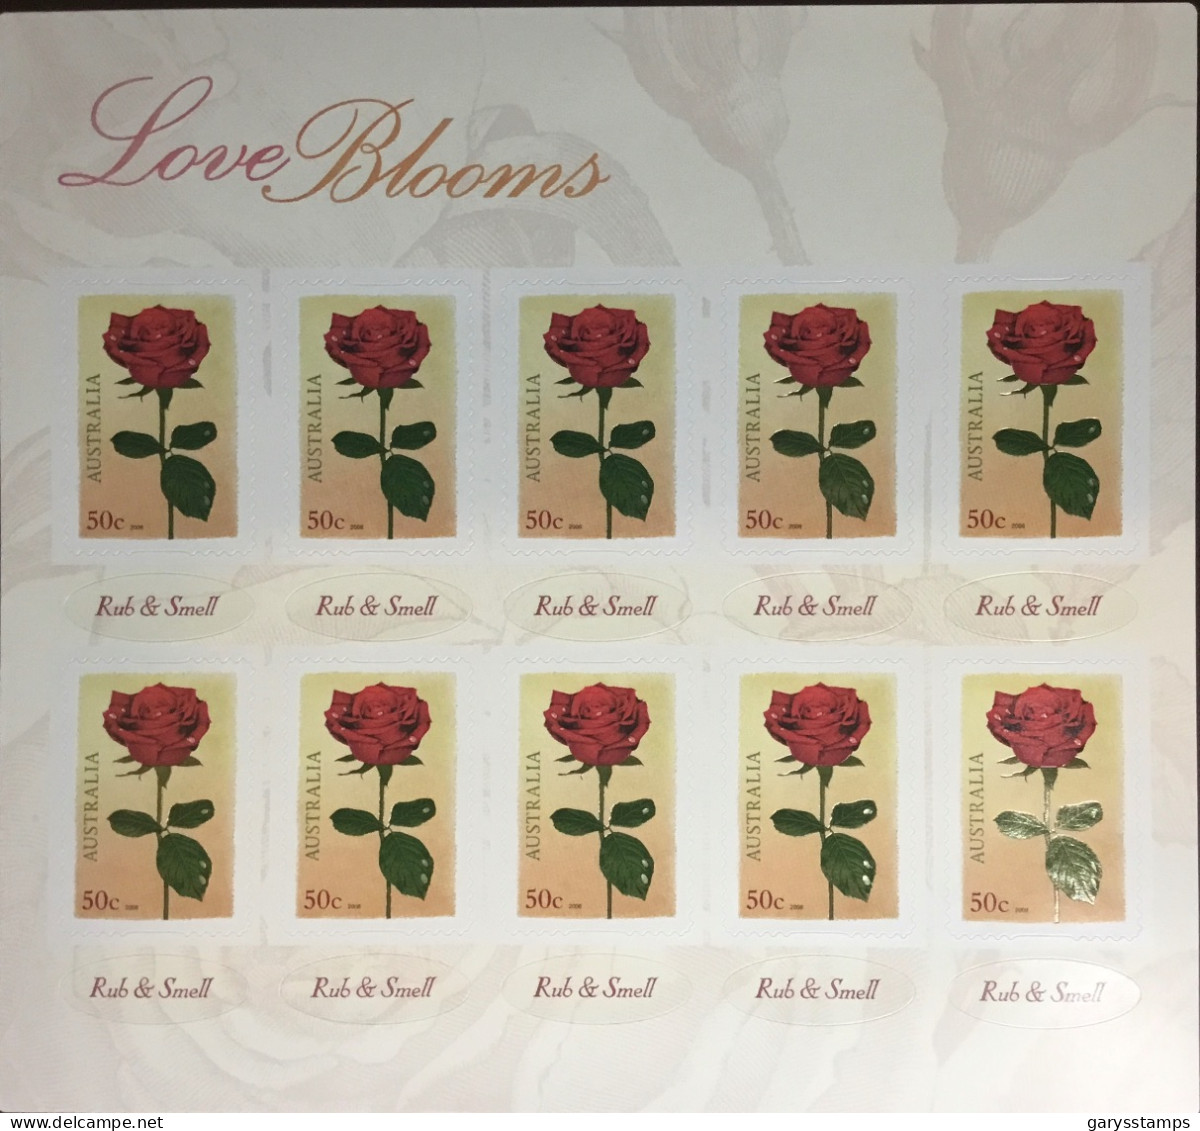 Australia 2008 Love Blooms Roses Flowers Scratch & Sniff Sheetlet MNH - Rose